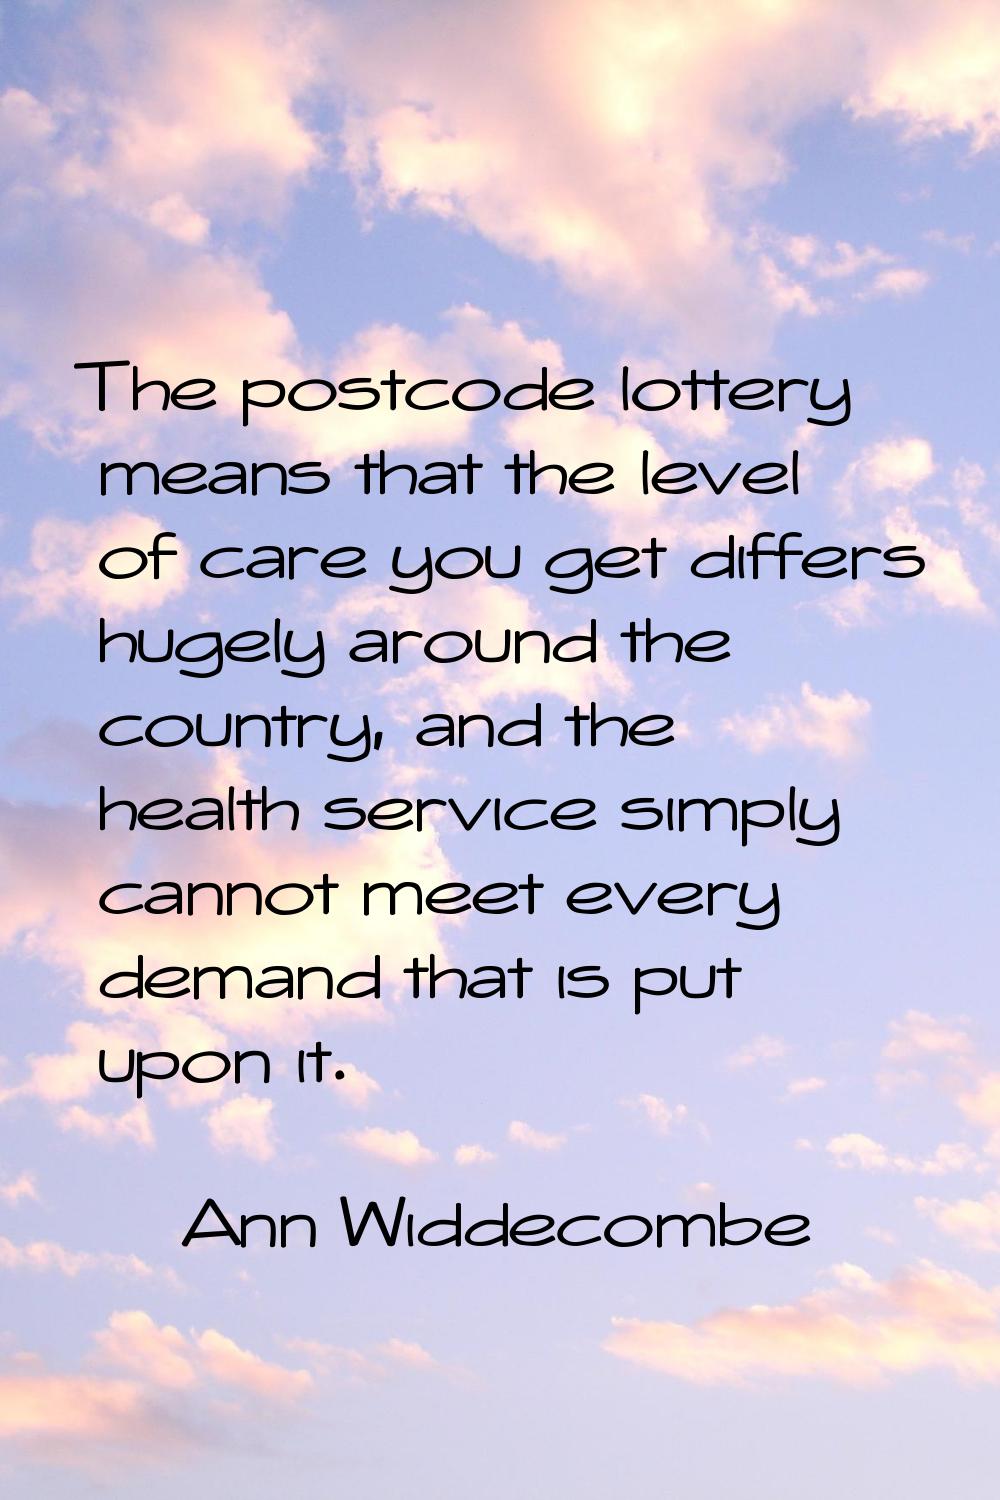 The postcode lottery means that the level of care you get differs hugely around the country, and th